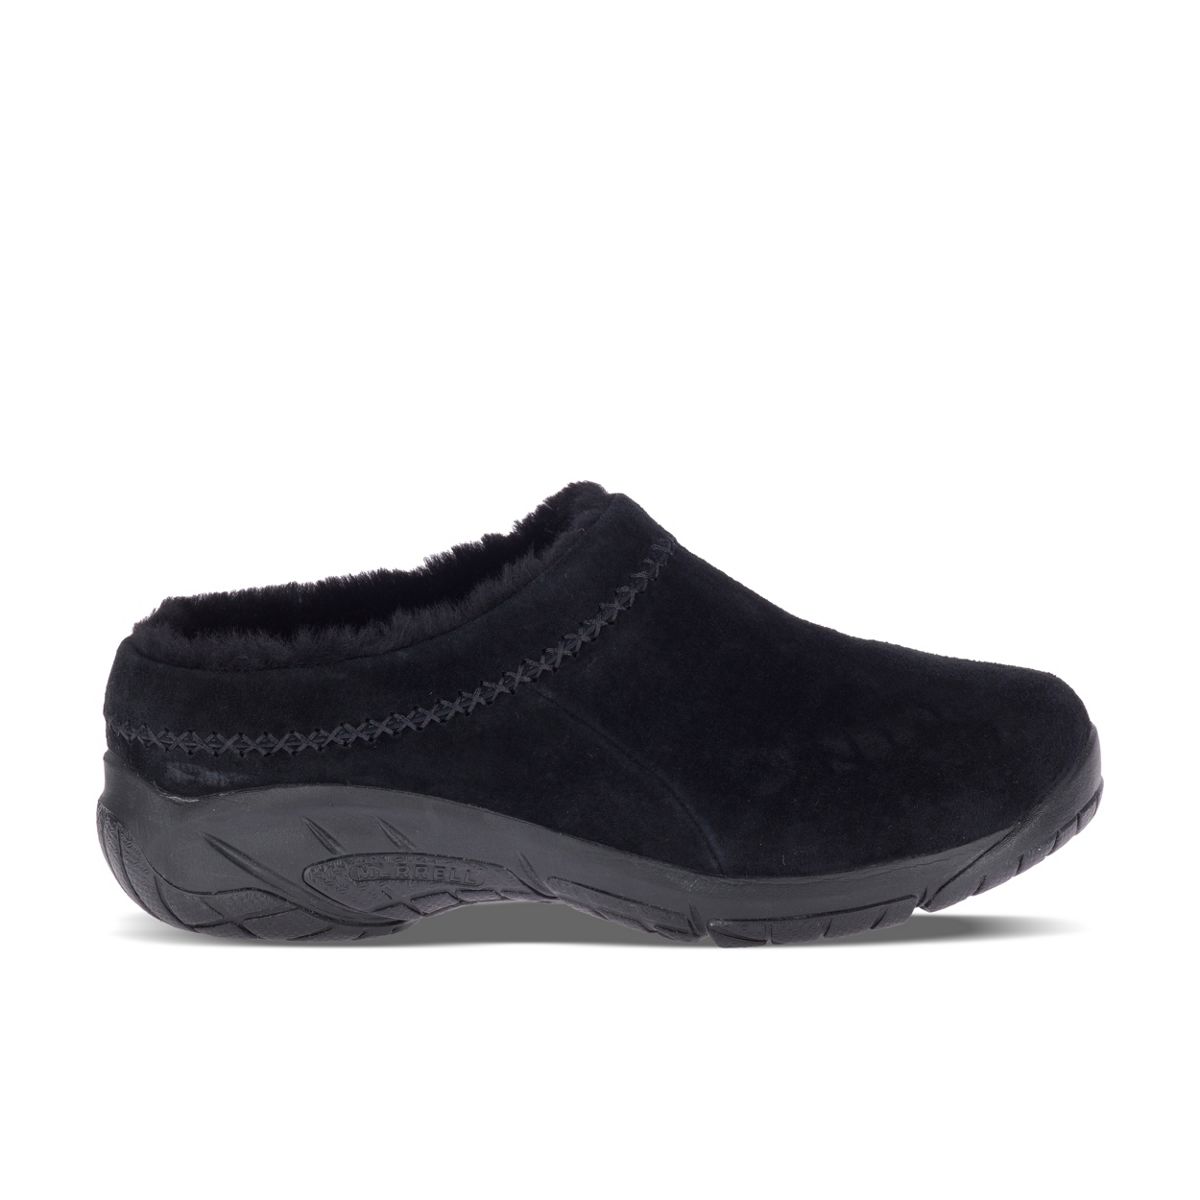 merrell comfort cozy lined suede clogs